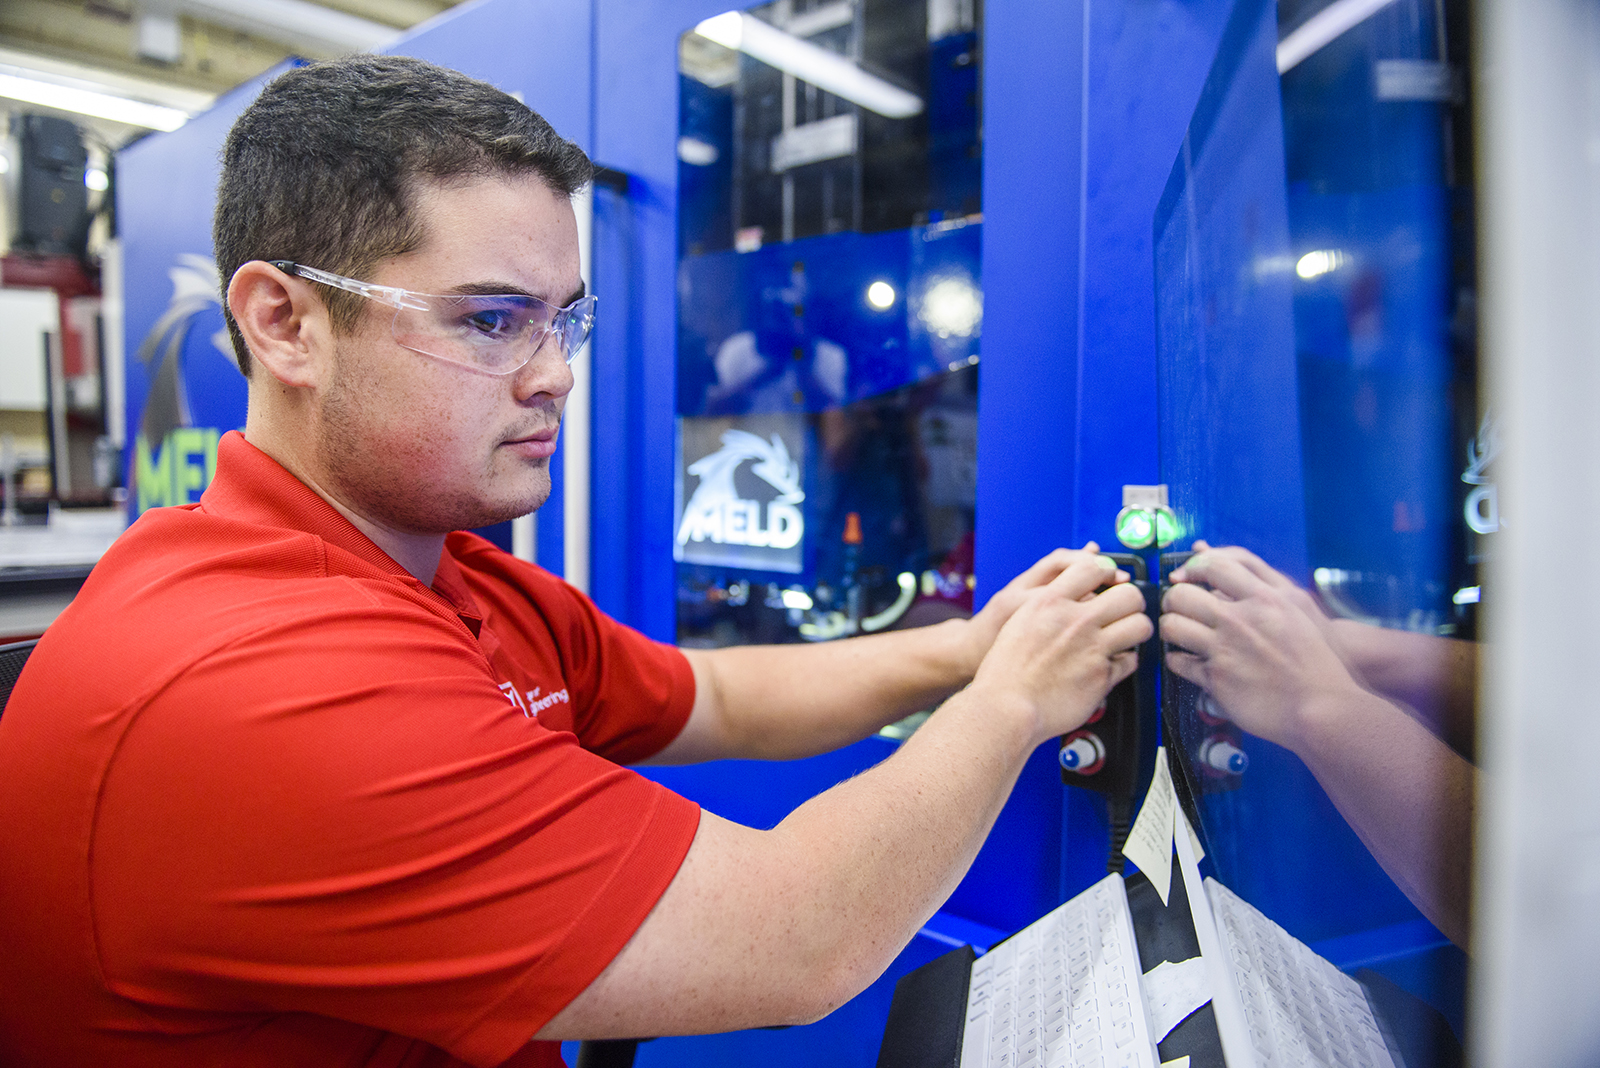 A student works the controls of a metal, 3D printer.